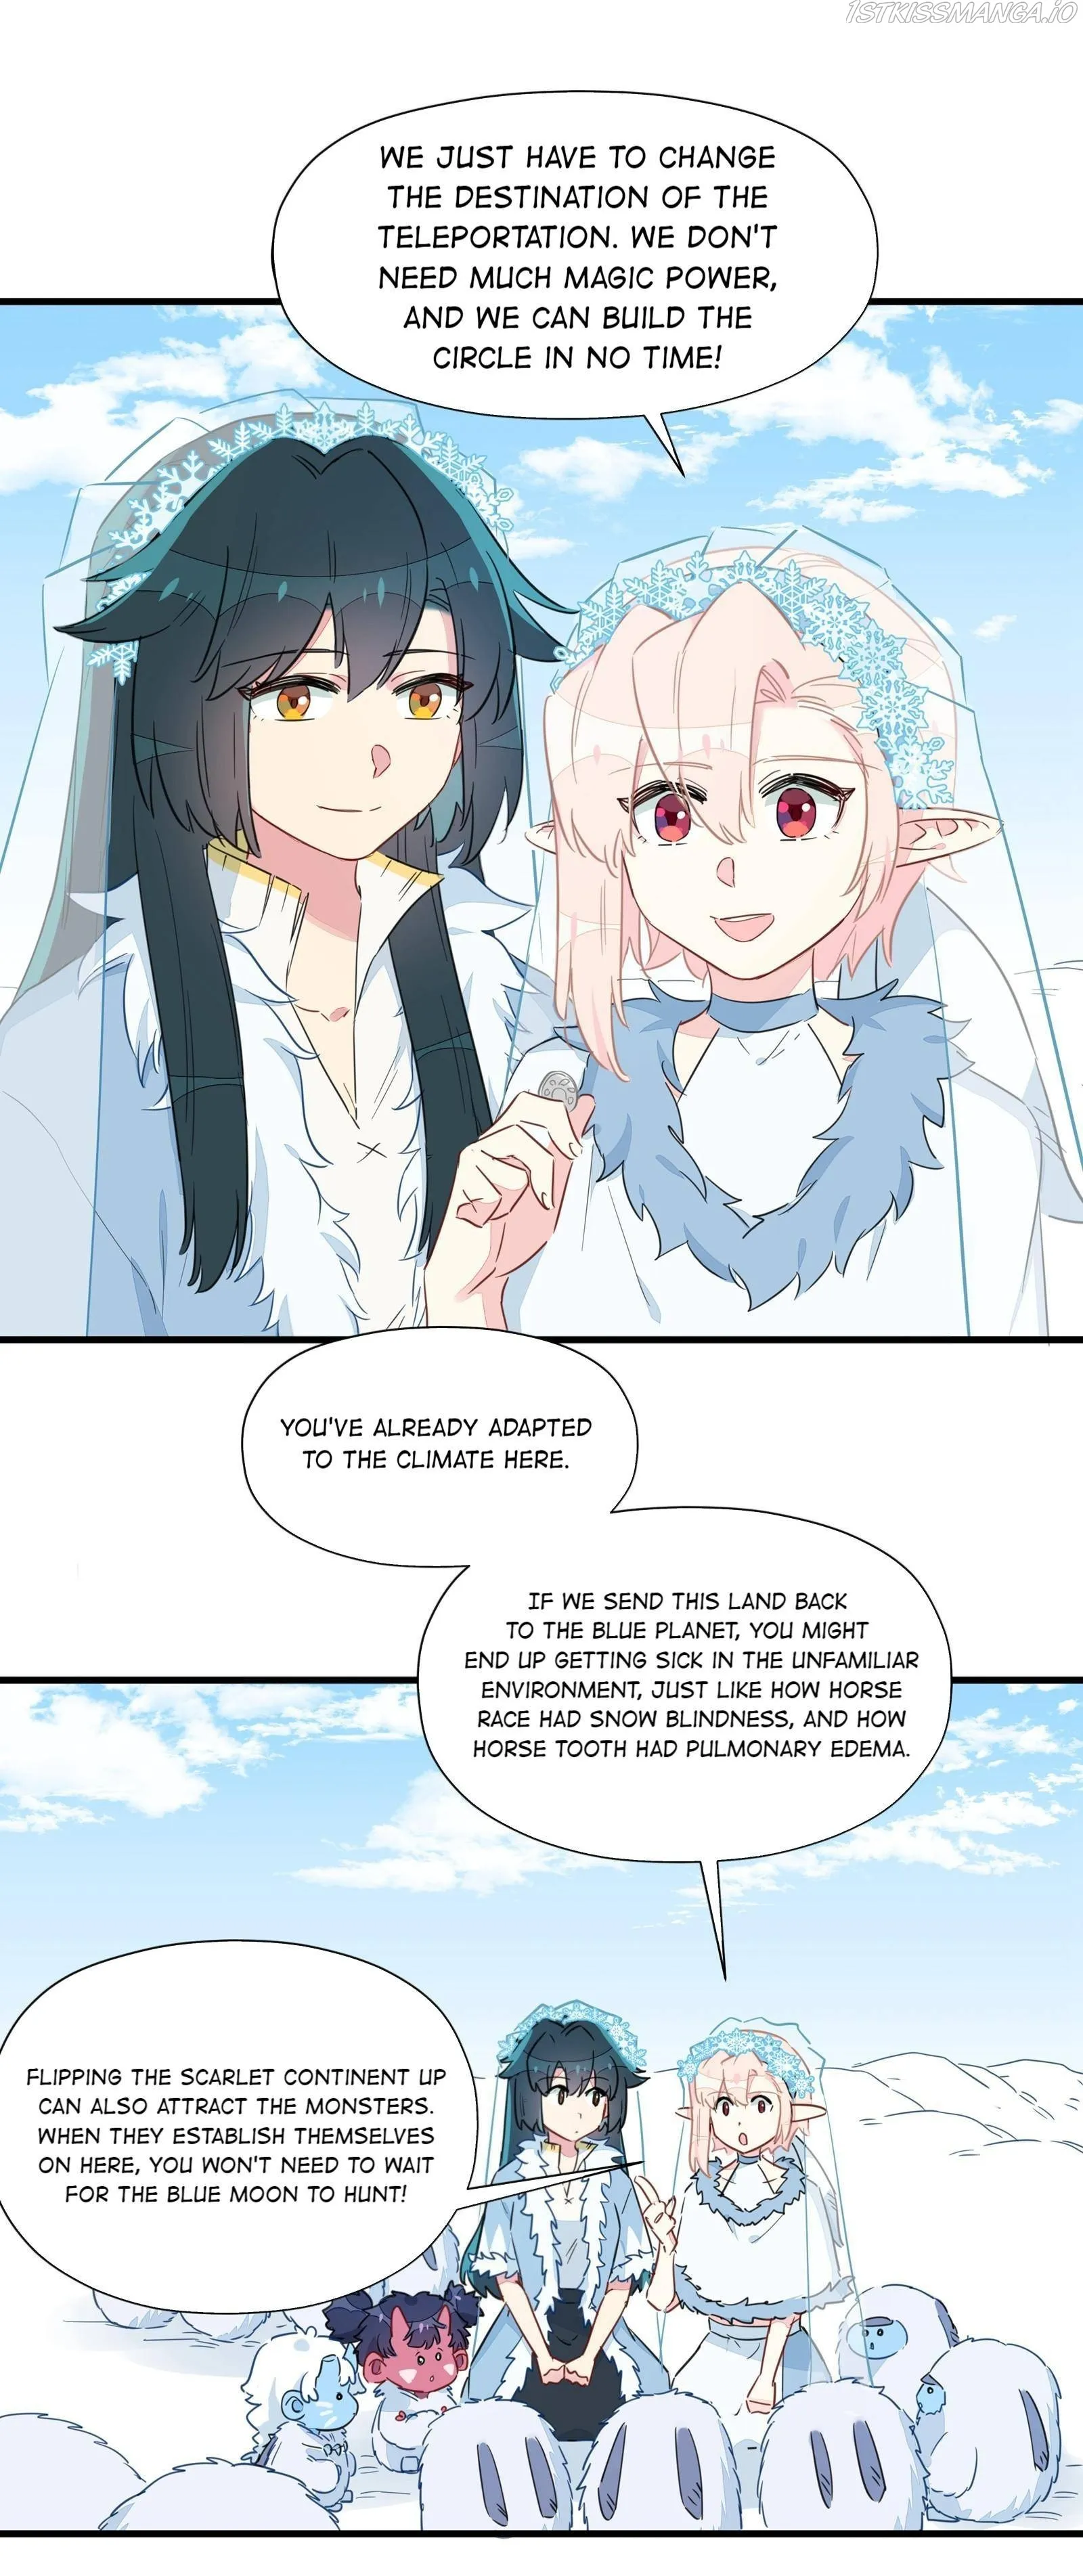 What Do I Do If I Signed A Marriage Contract With The Elf Princess? - Page 3